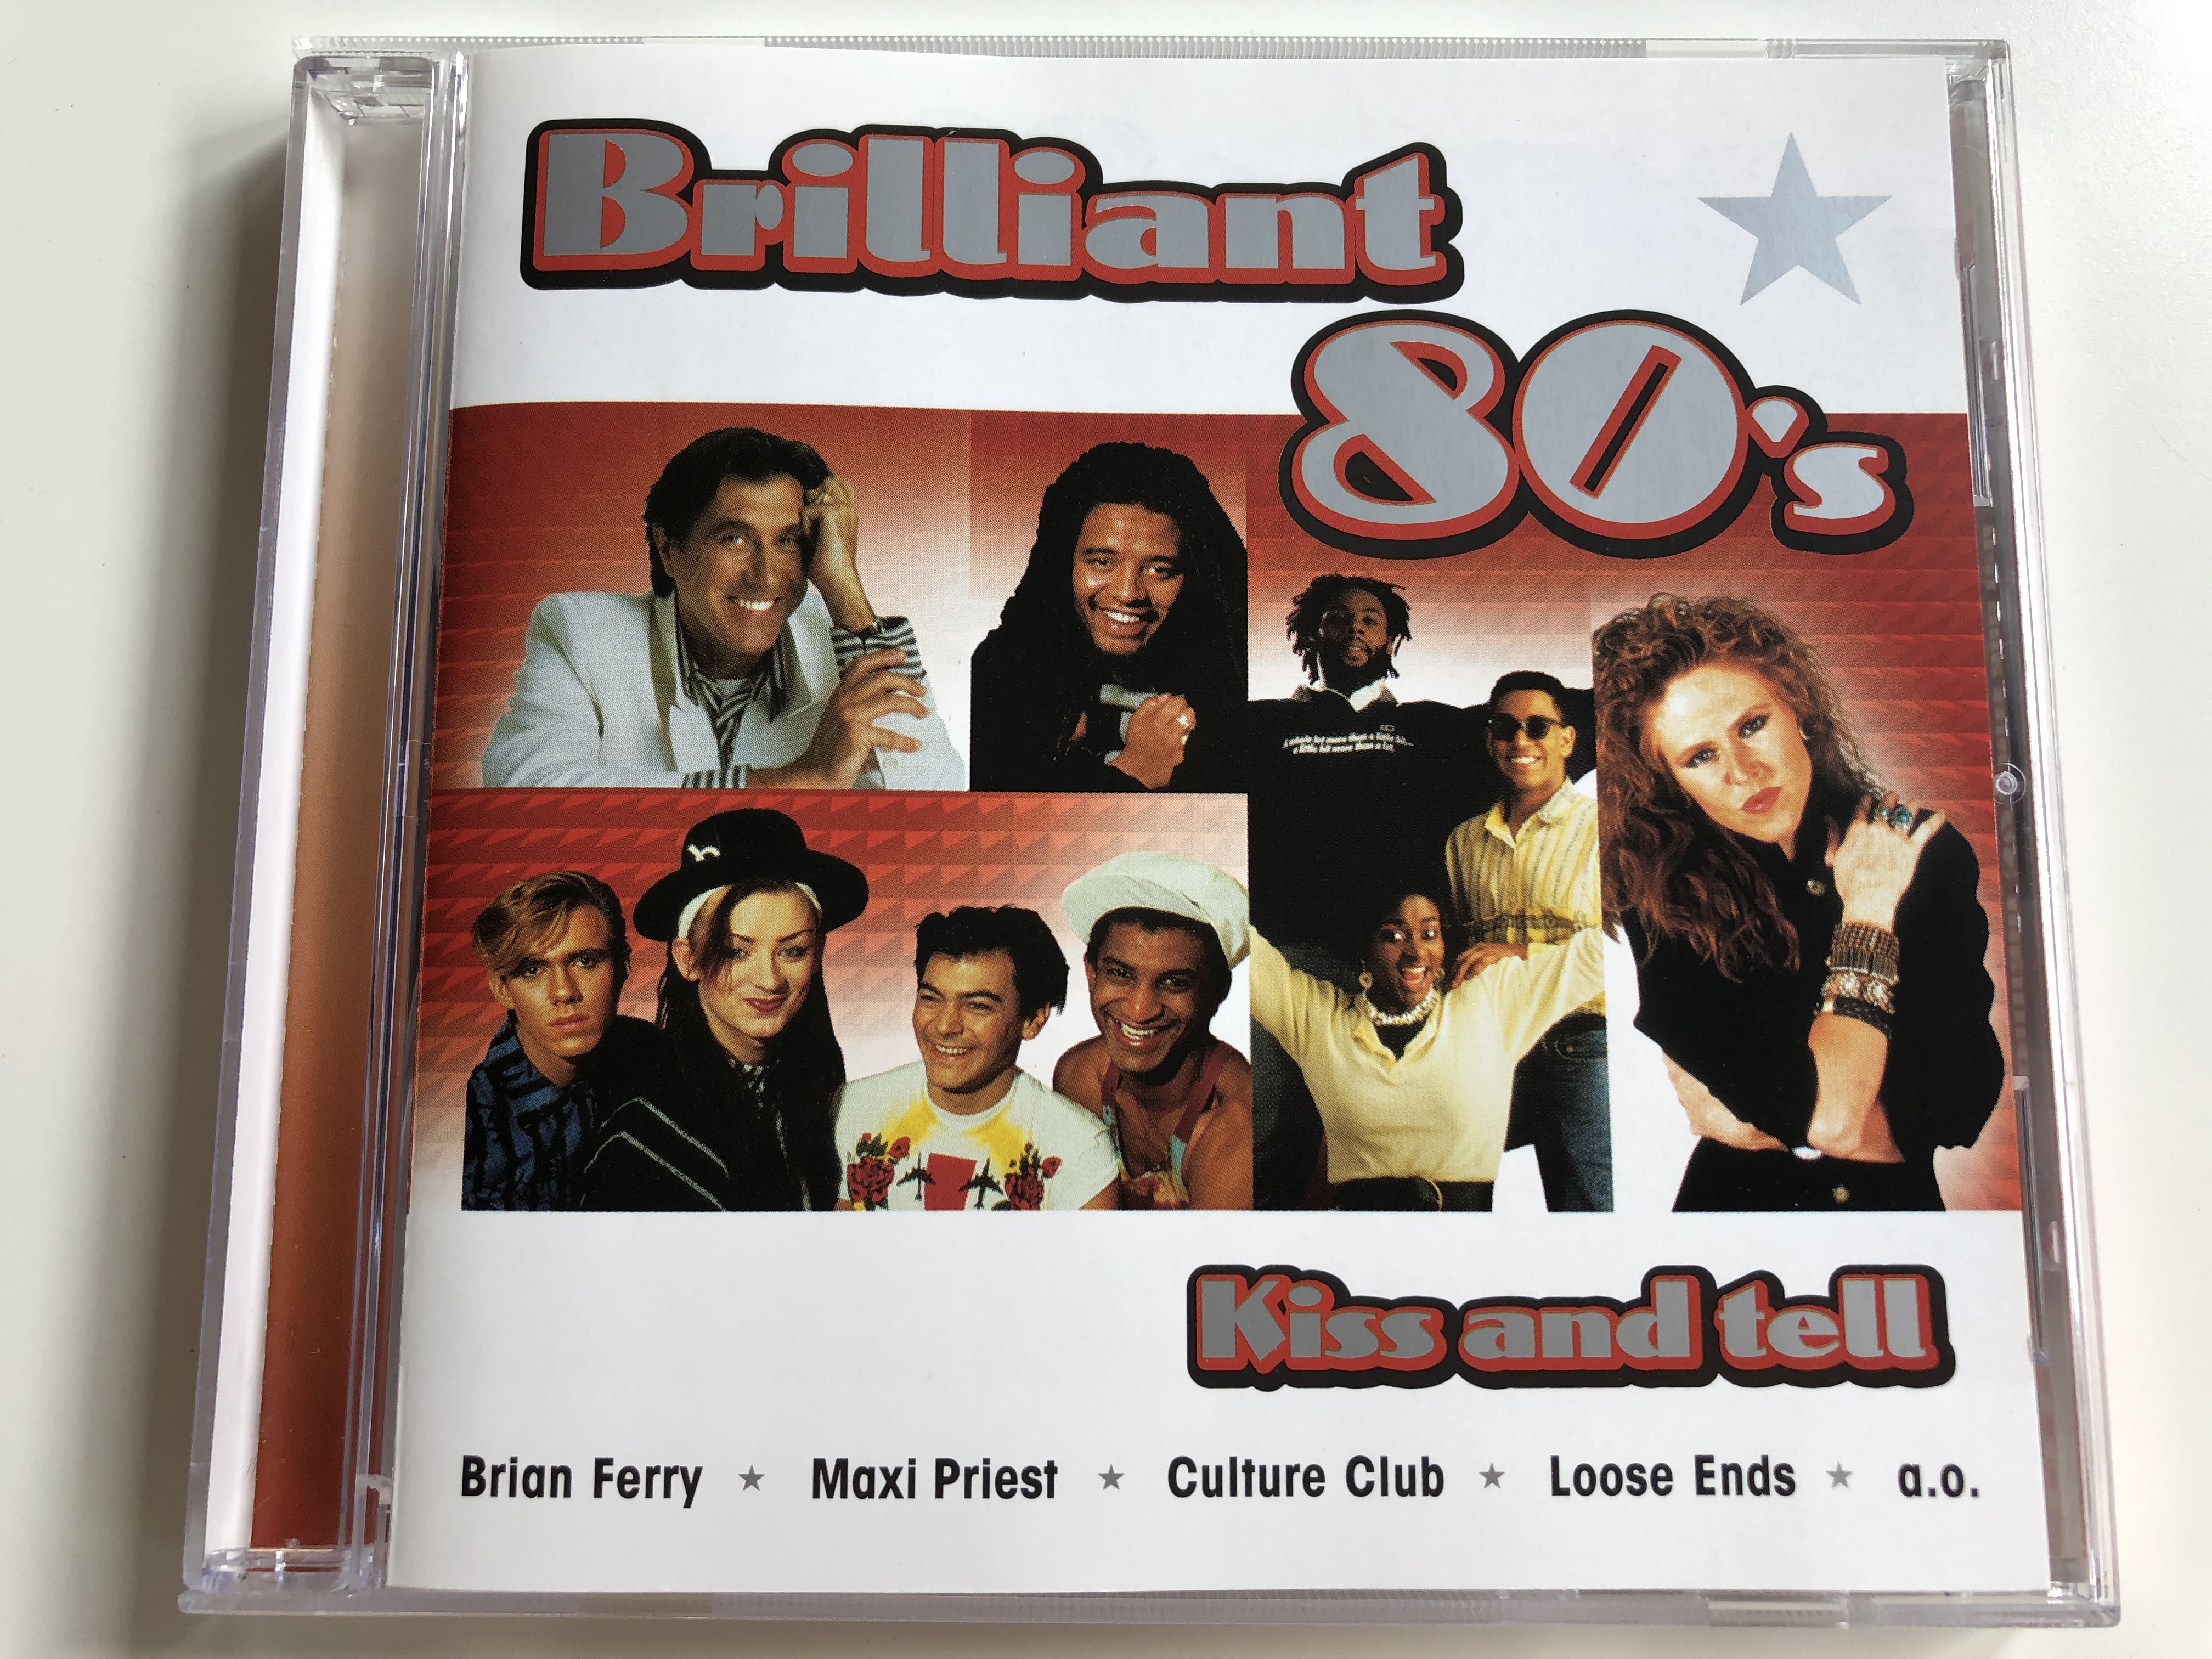 brilliant-80-s-kiss-and-tell-brian-ferry-maxi-priest-culture-club-loose-ends-a.o.-disky-audio-cd-2001-dc-991242-1-.jpg